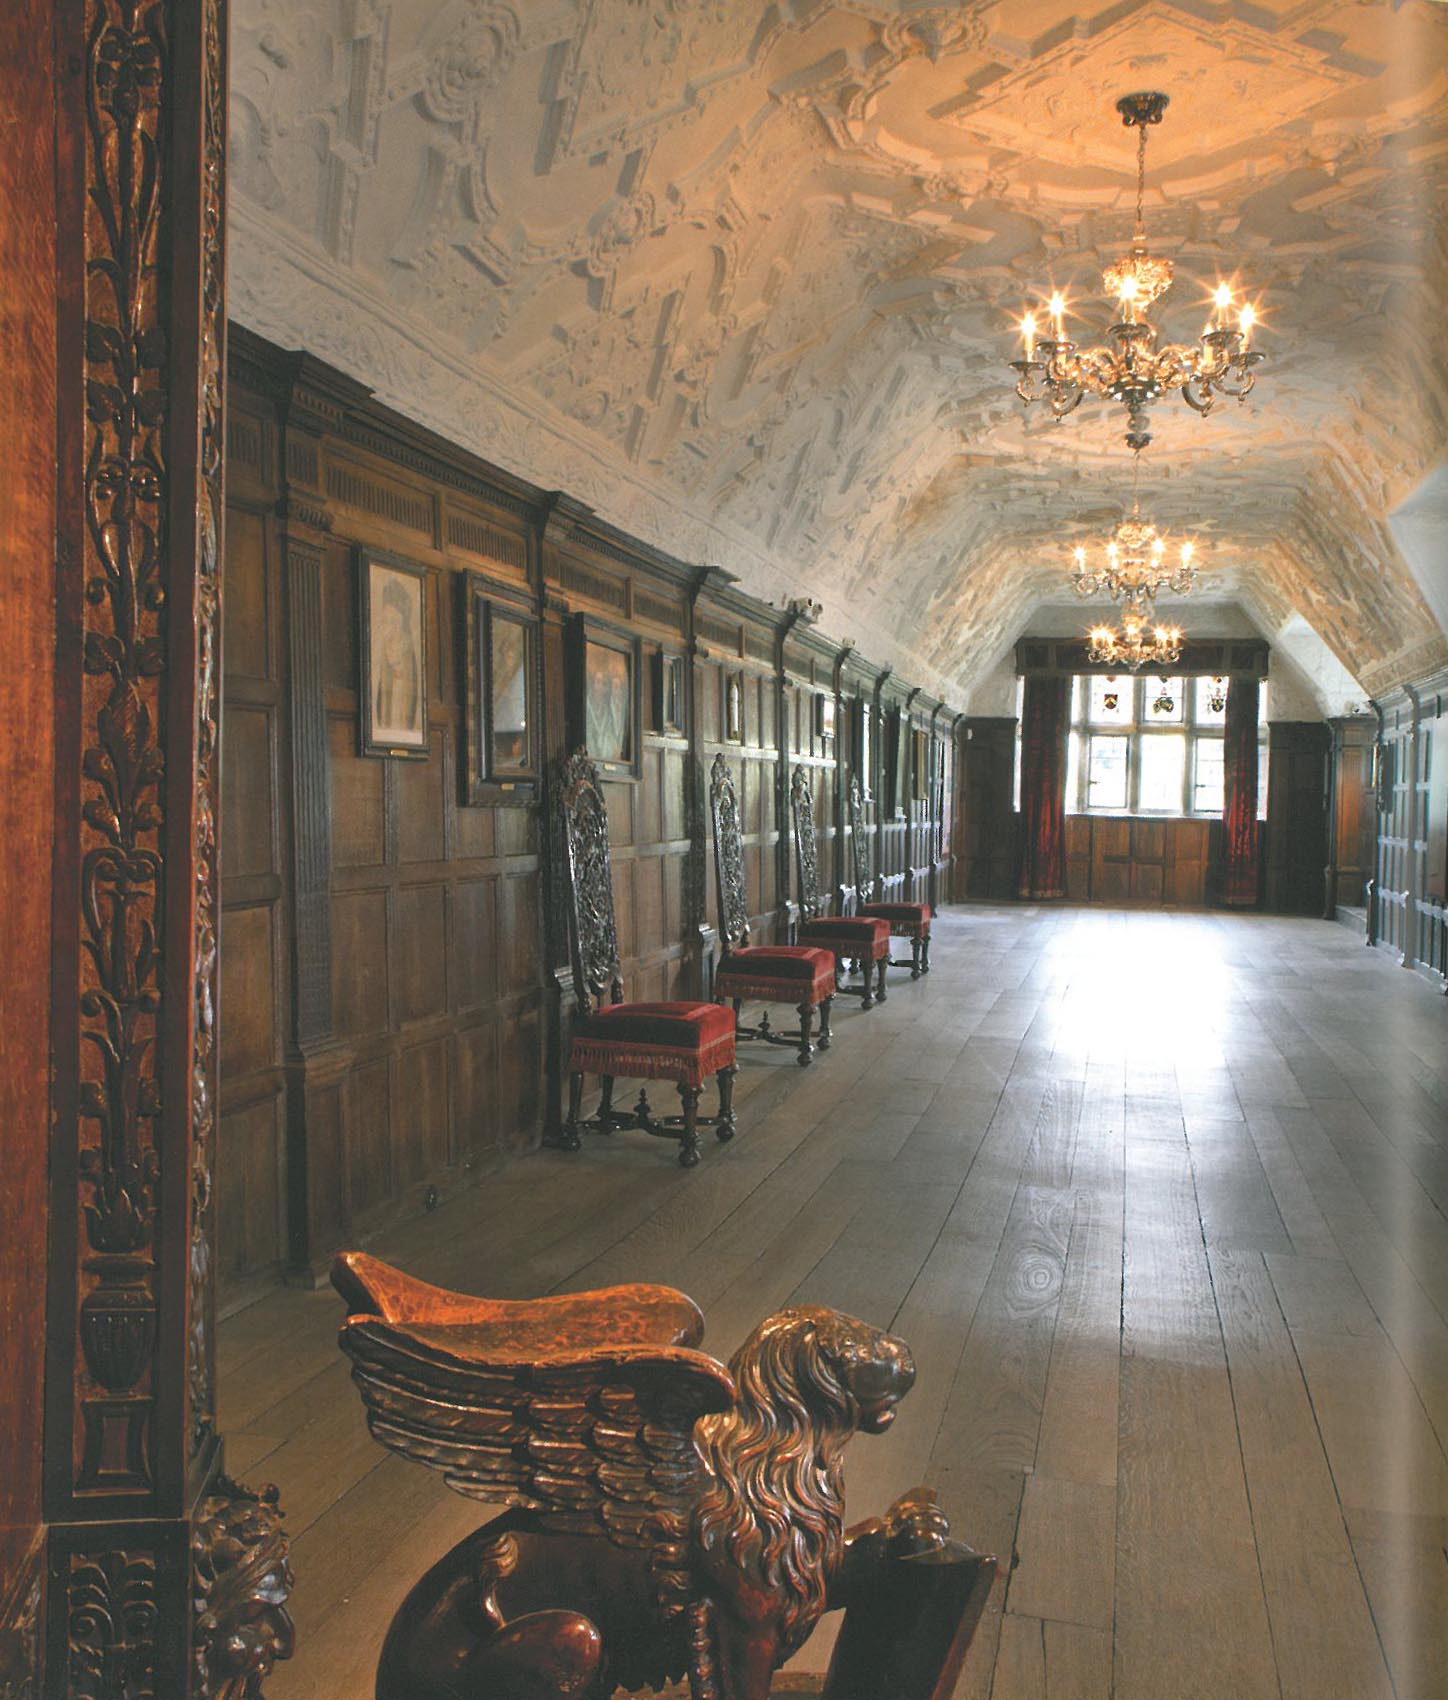 The Long Gallery is more than 98 feet long and runs the entire width of the building. This was added by Thomas Bullen in 1506, and was used for entertaining, displaying art, and taking exercise during inclement weather. The paneling is Elizabethan, and the ceiling is a 16th century style reproduction made for Astor. Tradition says that Henry VIII held Court in the alcove at the far end of the Long Gallery when he visited Hever Castle. Image courtesy of Hever Castle.